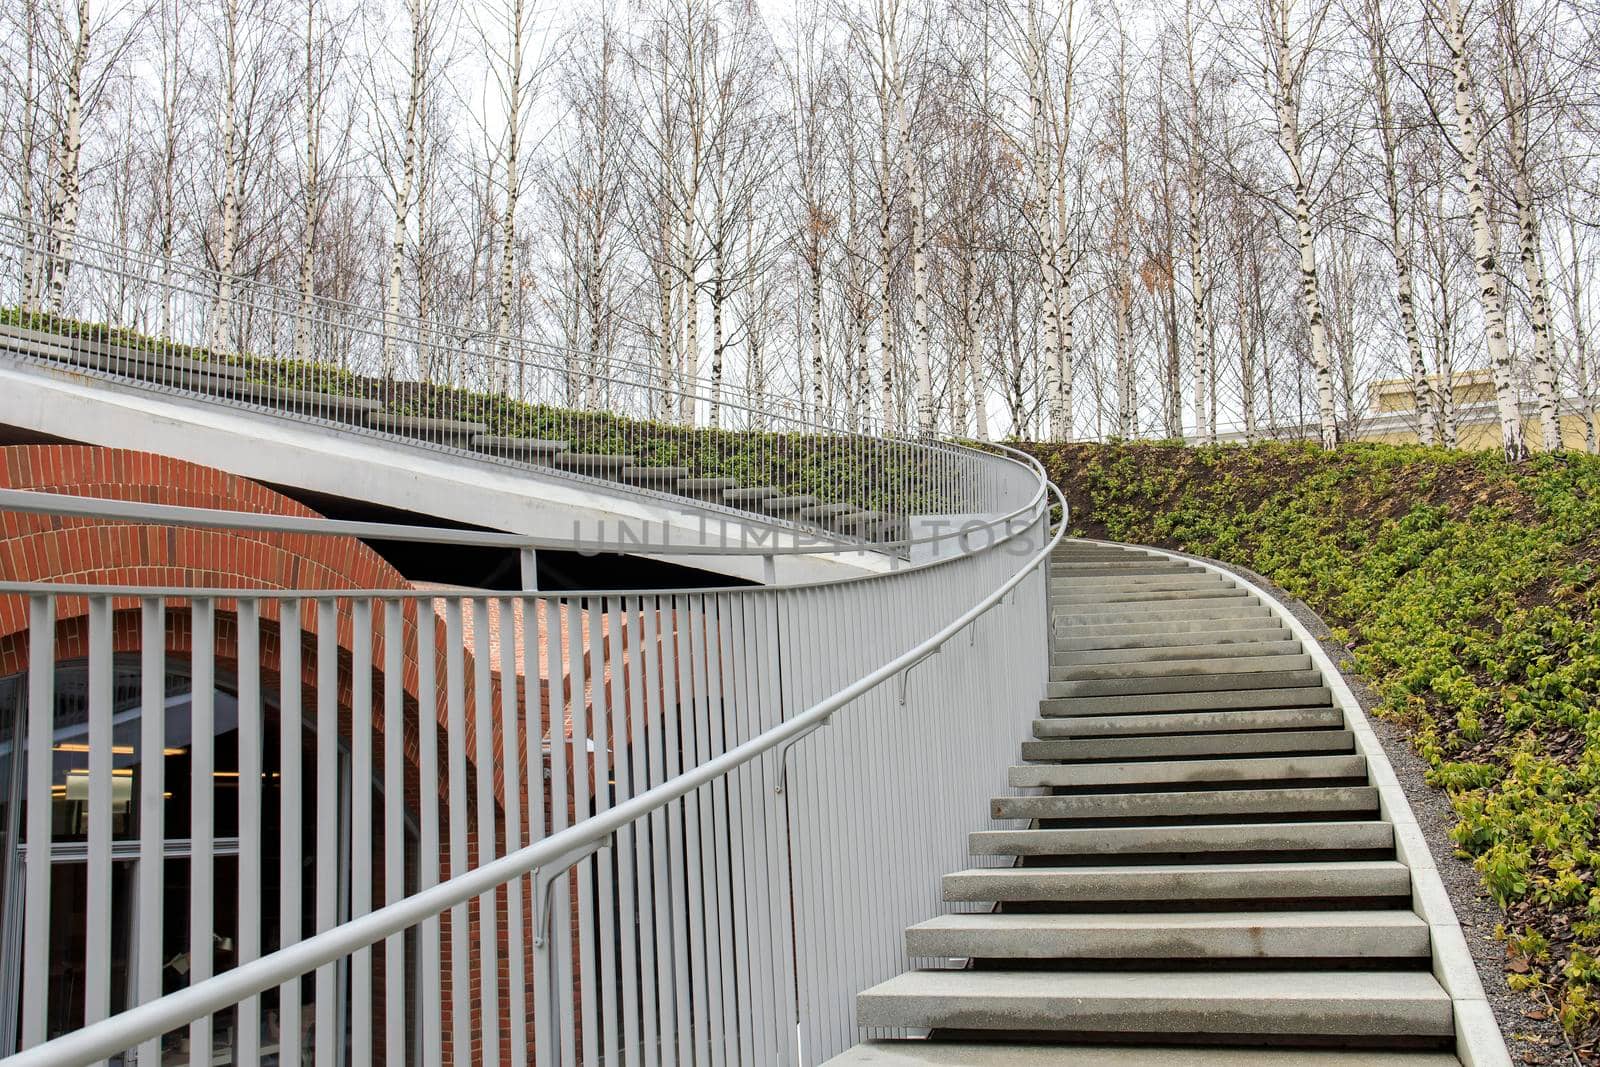 Tall modern winding staircase with railings in a birch grove